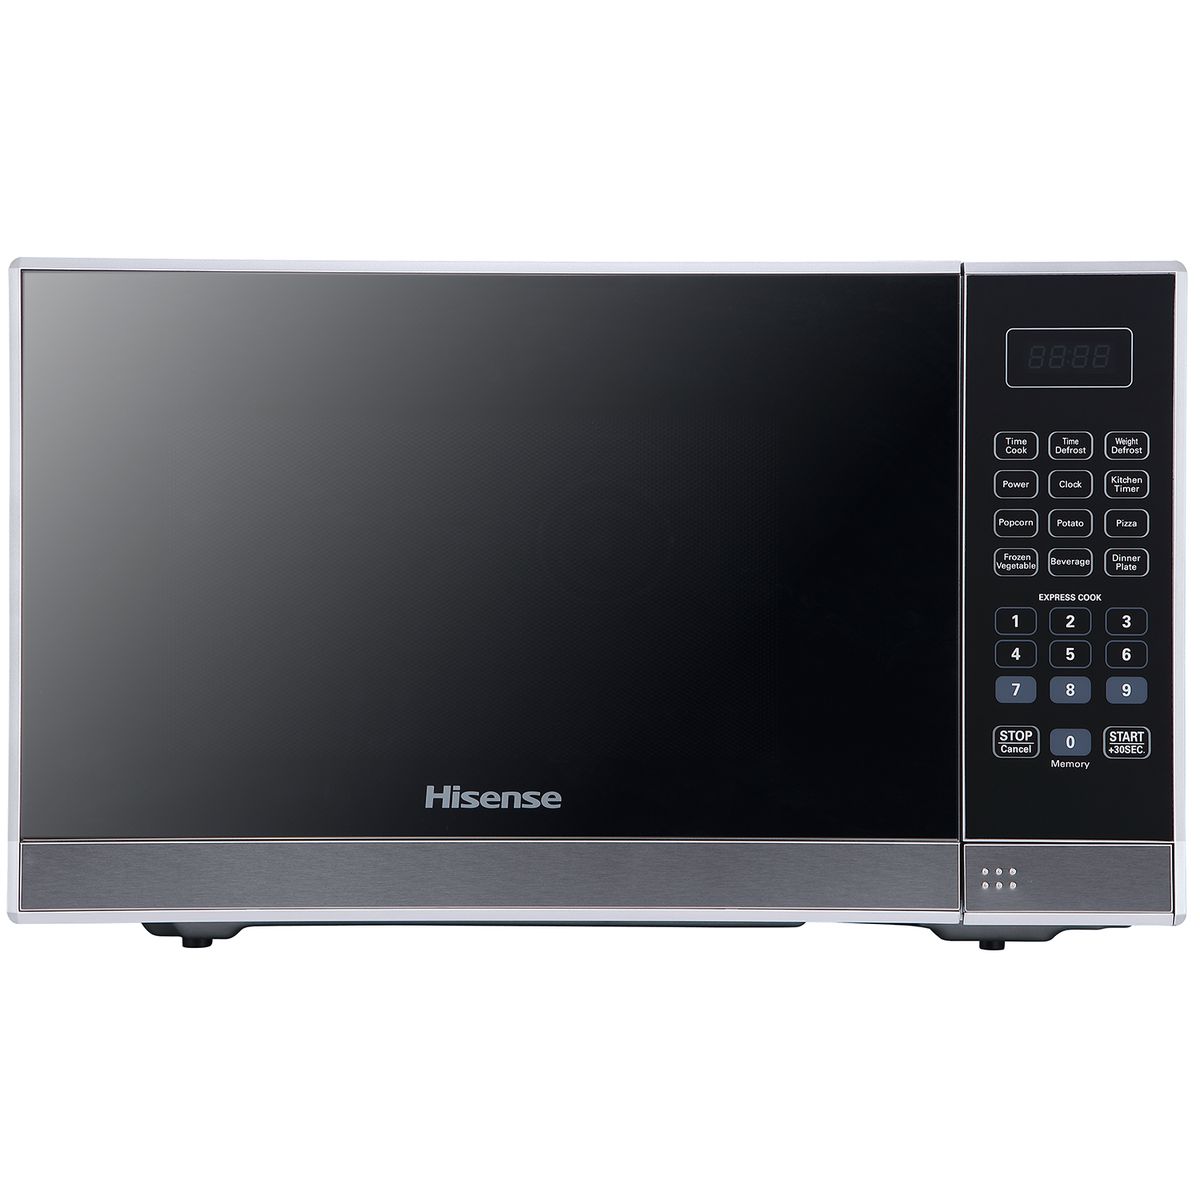 Hisense 36L Silver Microwave - H36MOMMI Buy Online in Zimbabwe thedailysale.shop